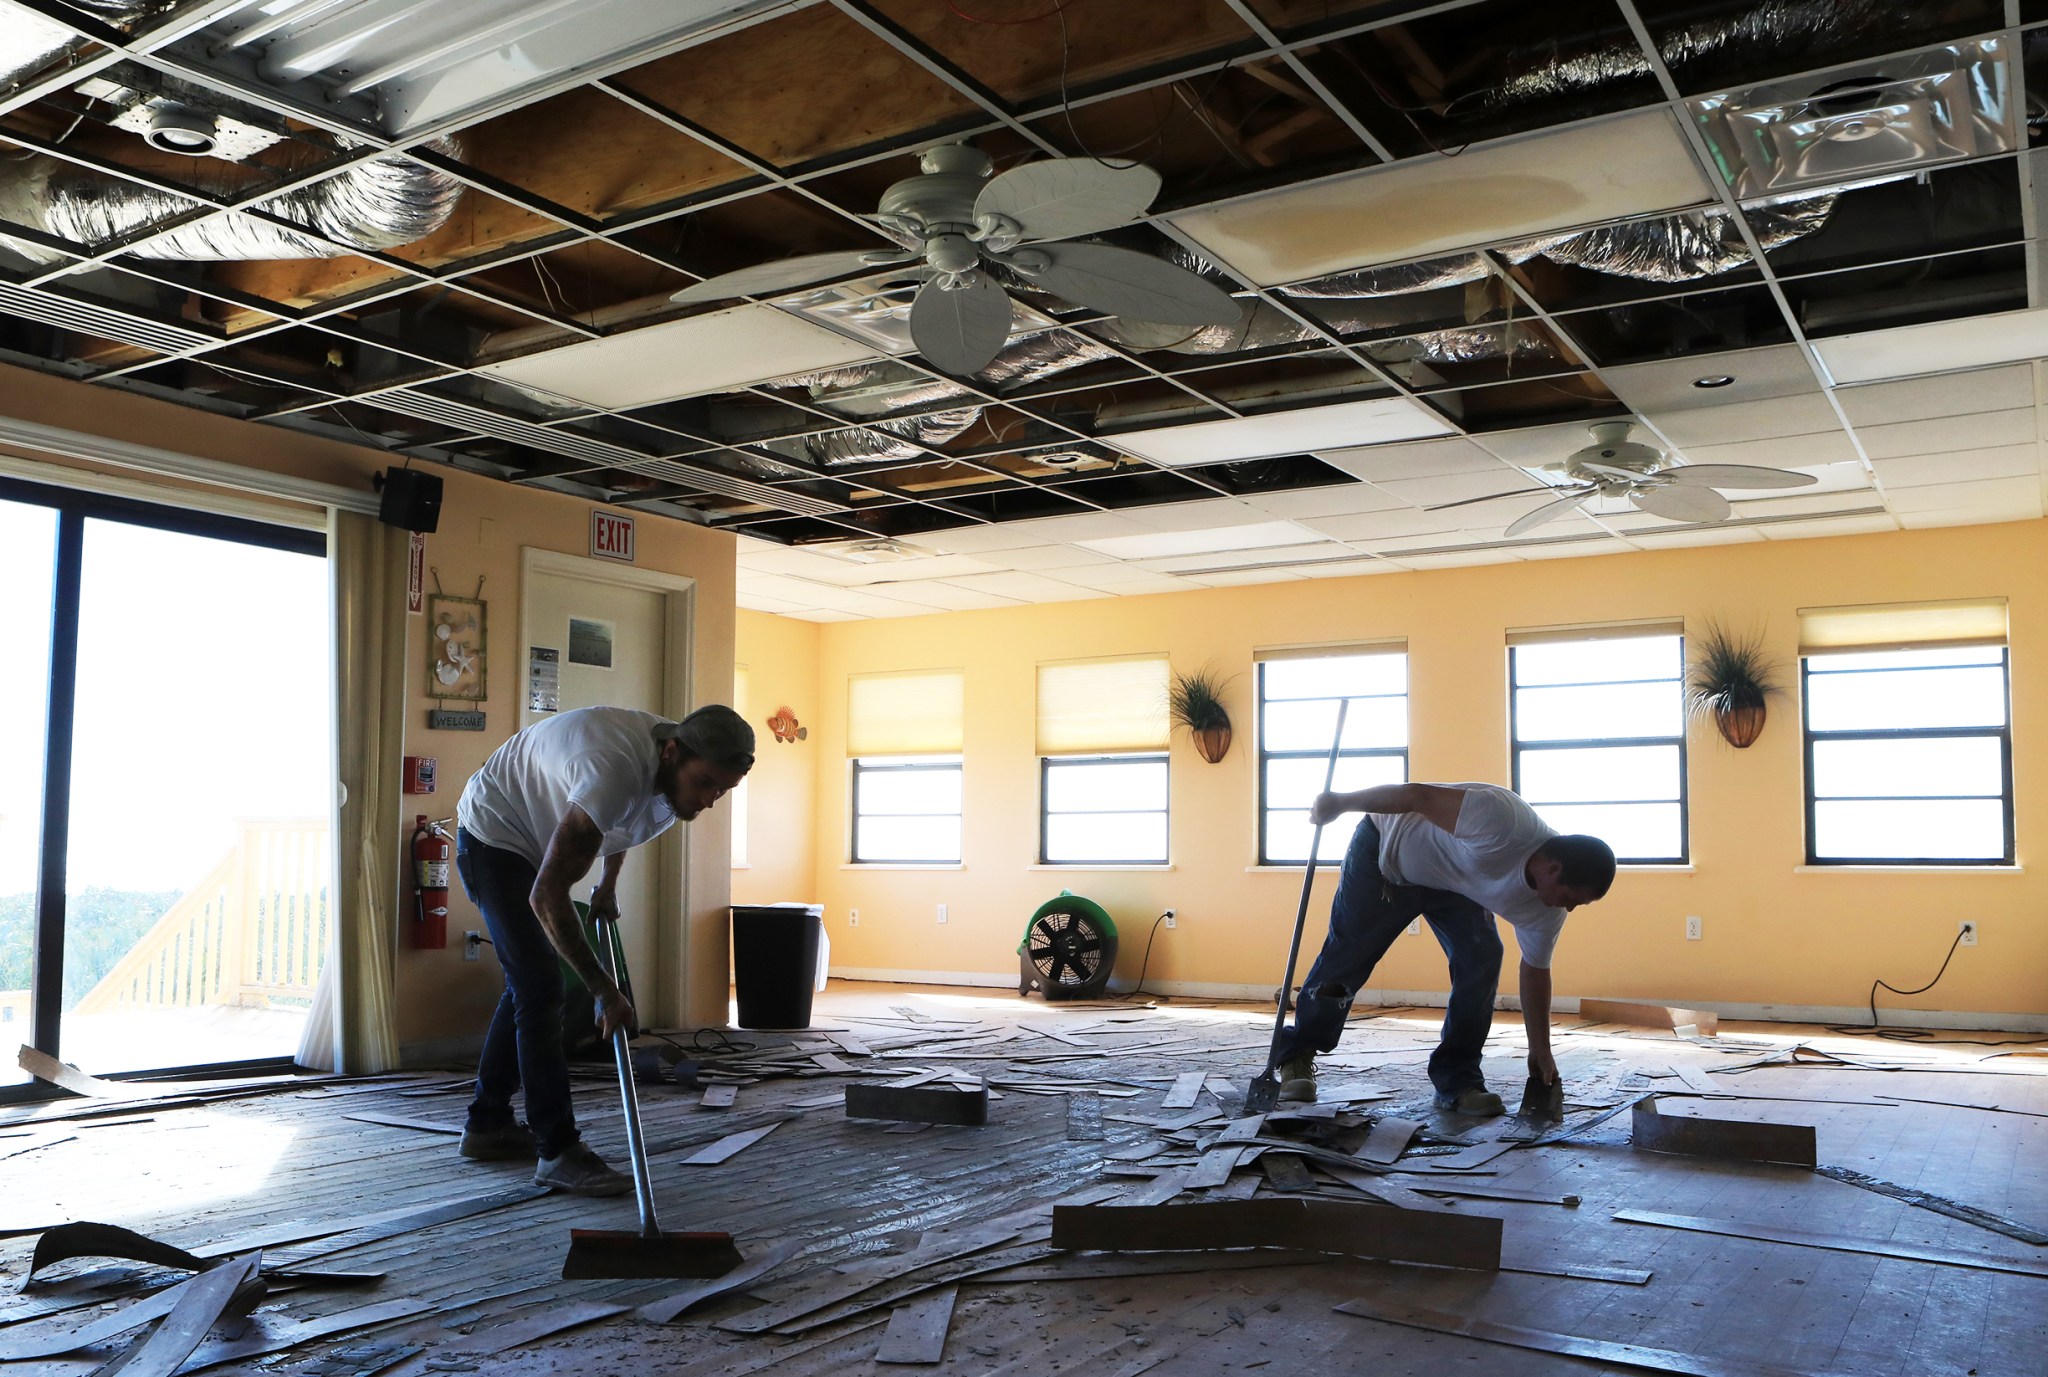 The Disaster Assessment and Recovery Team works on flooring repairs 